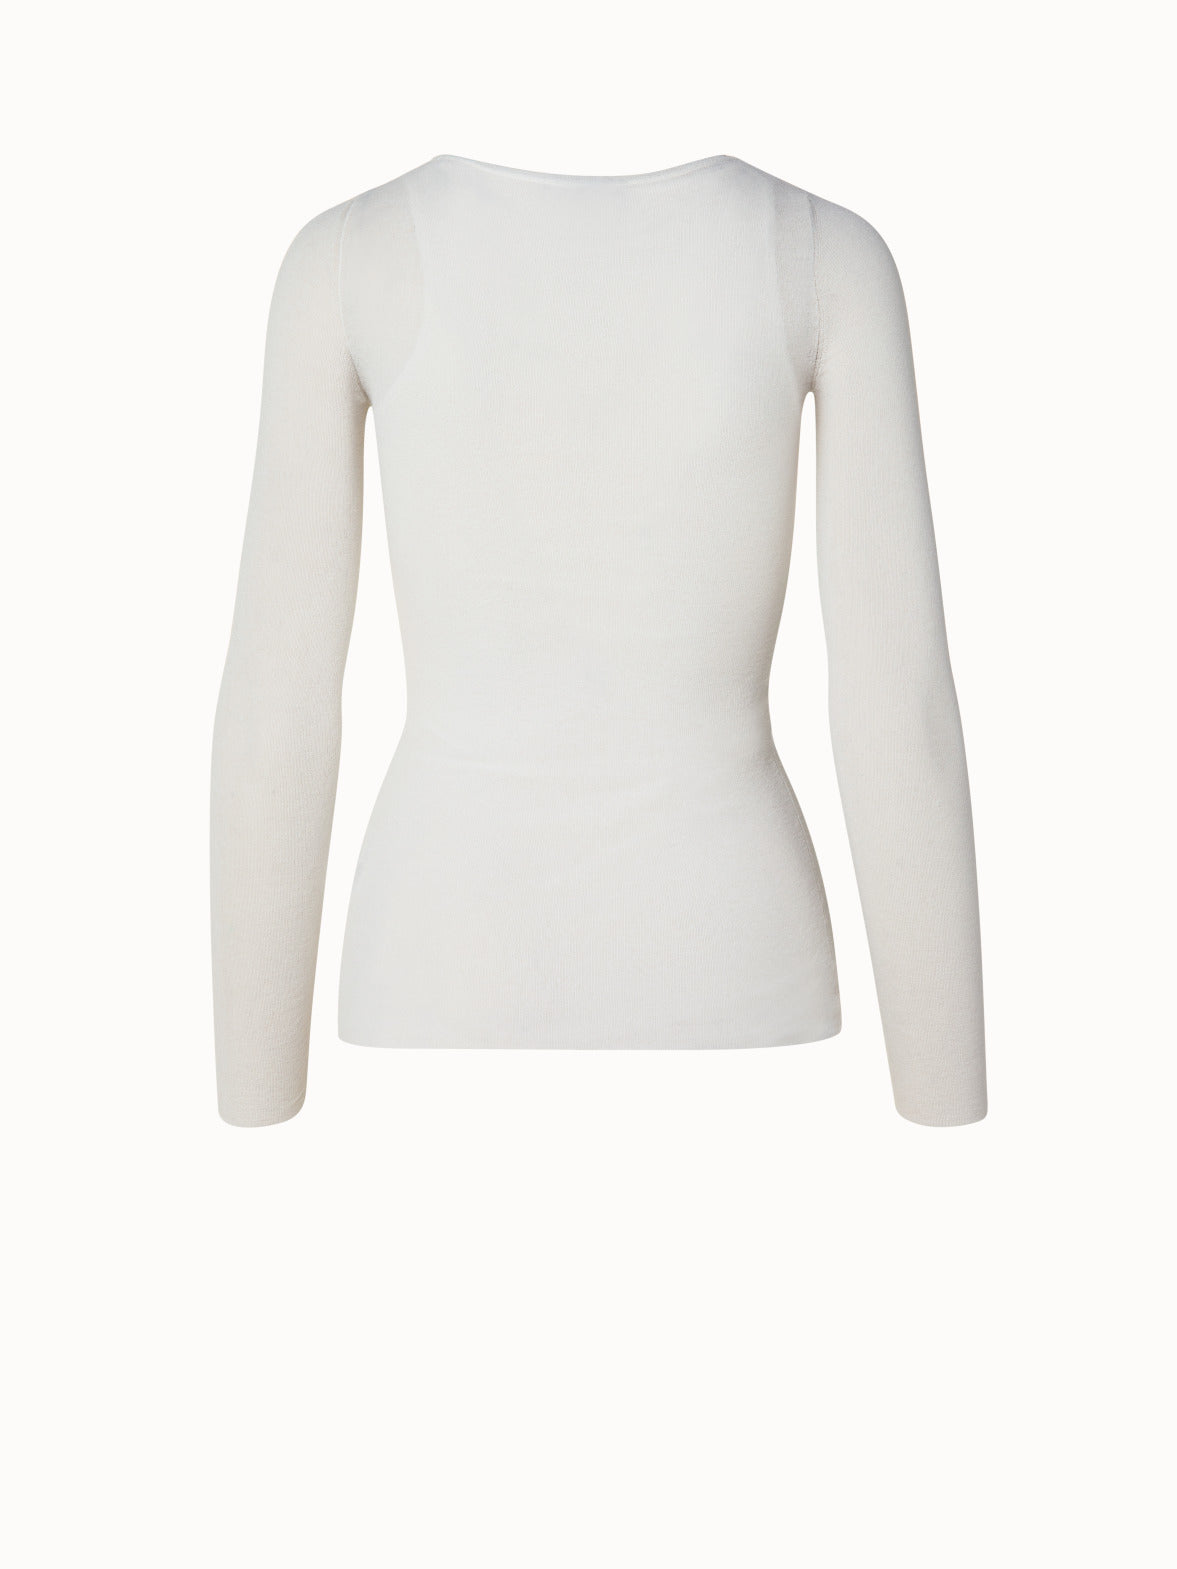 Two in One Semi-Transparent Layered Knit Top with Scoop Neck